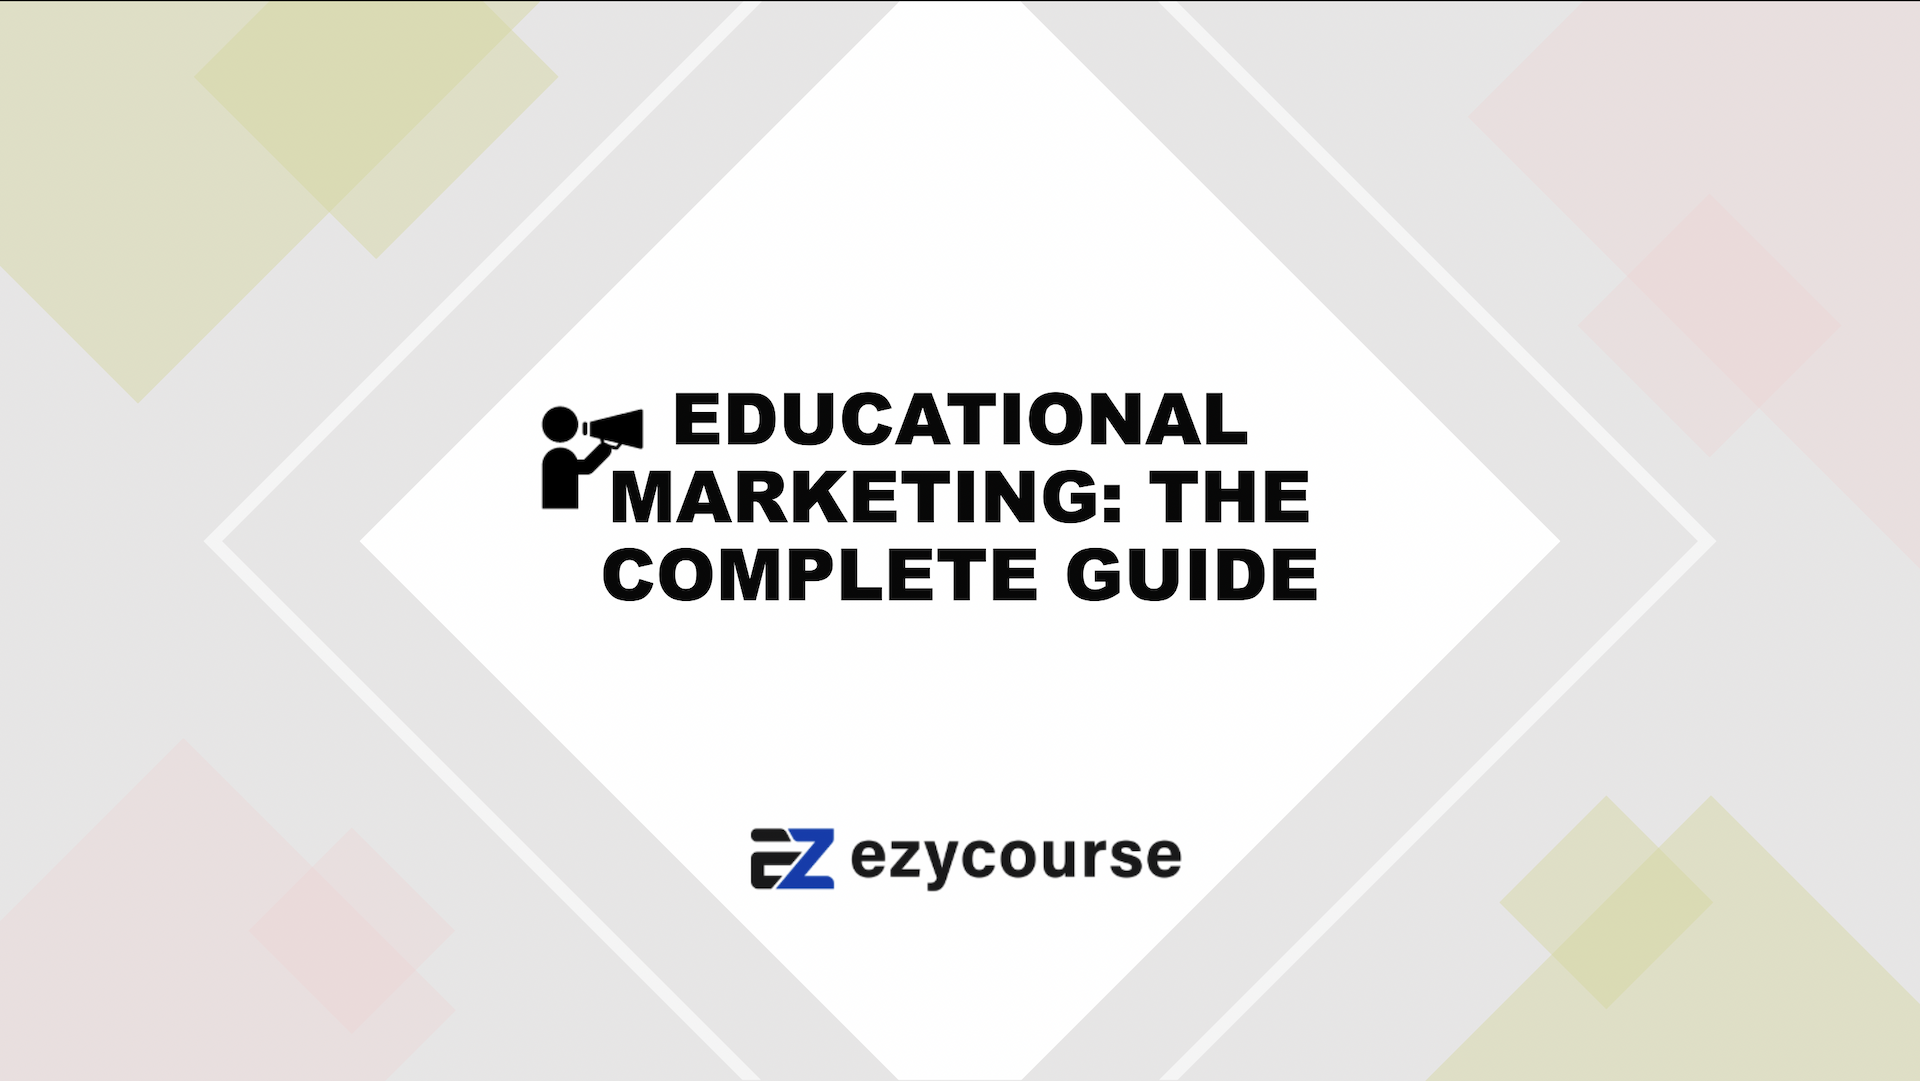 Educational Marketing: The Complete Guide